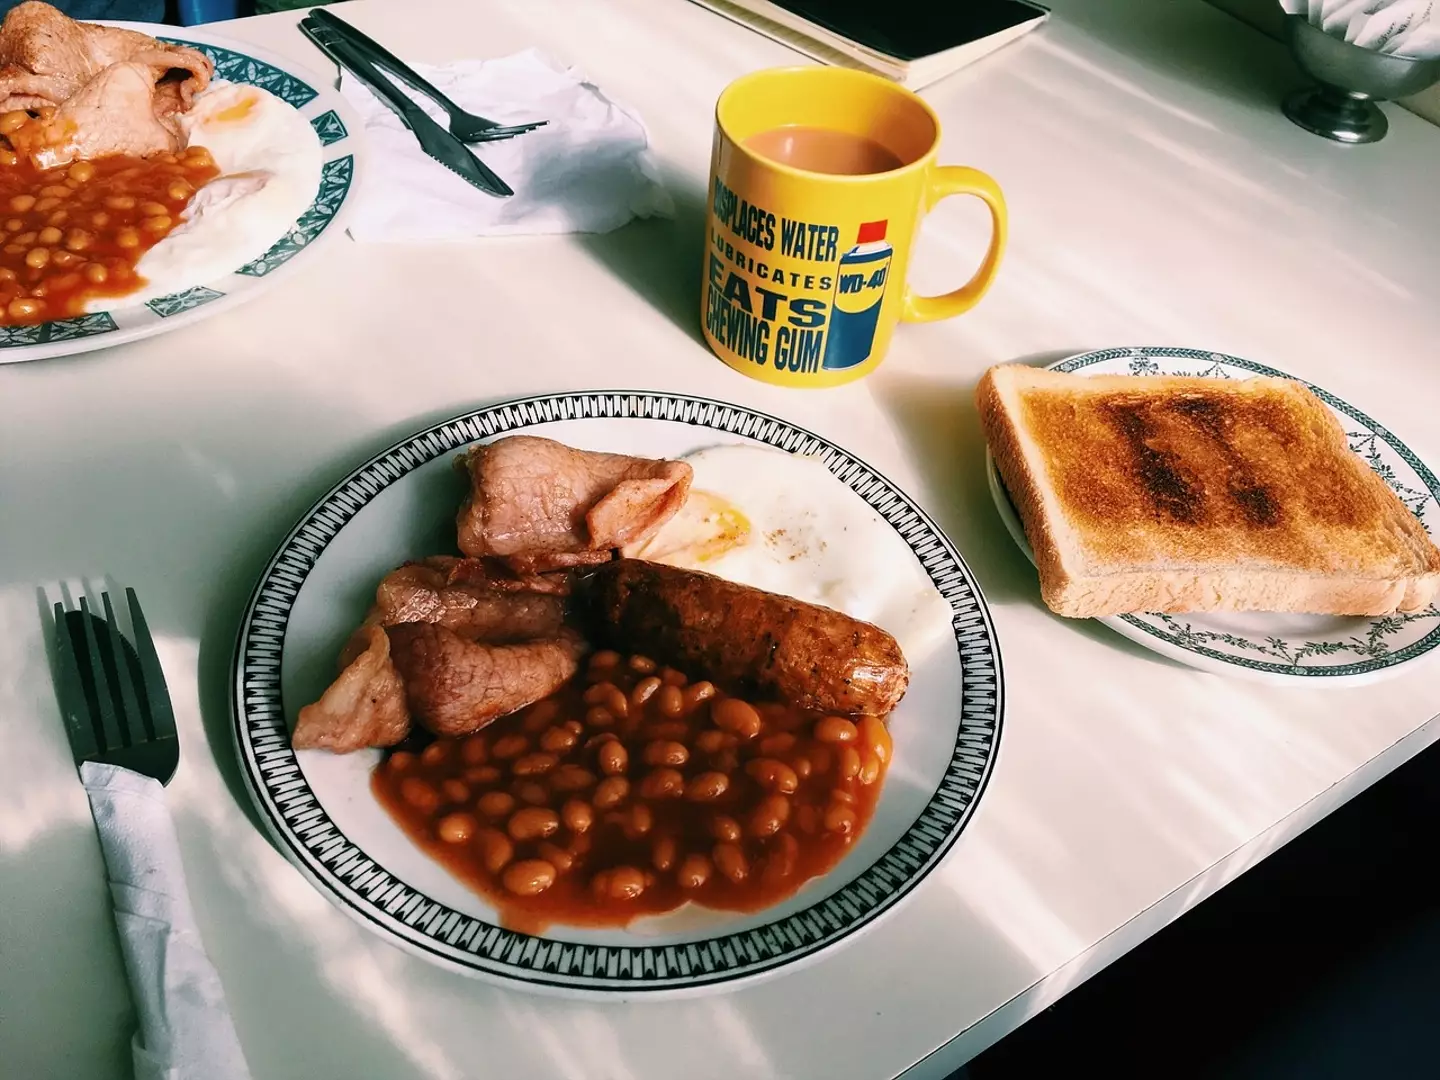 English breakfasts are widely beloved - but can prove to be controversial.